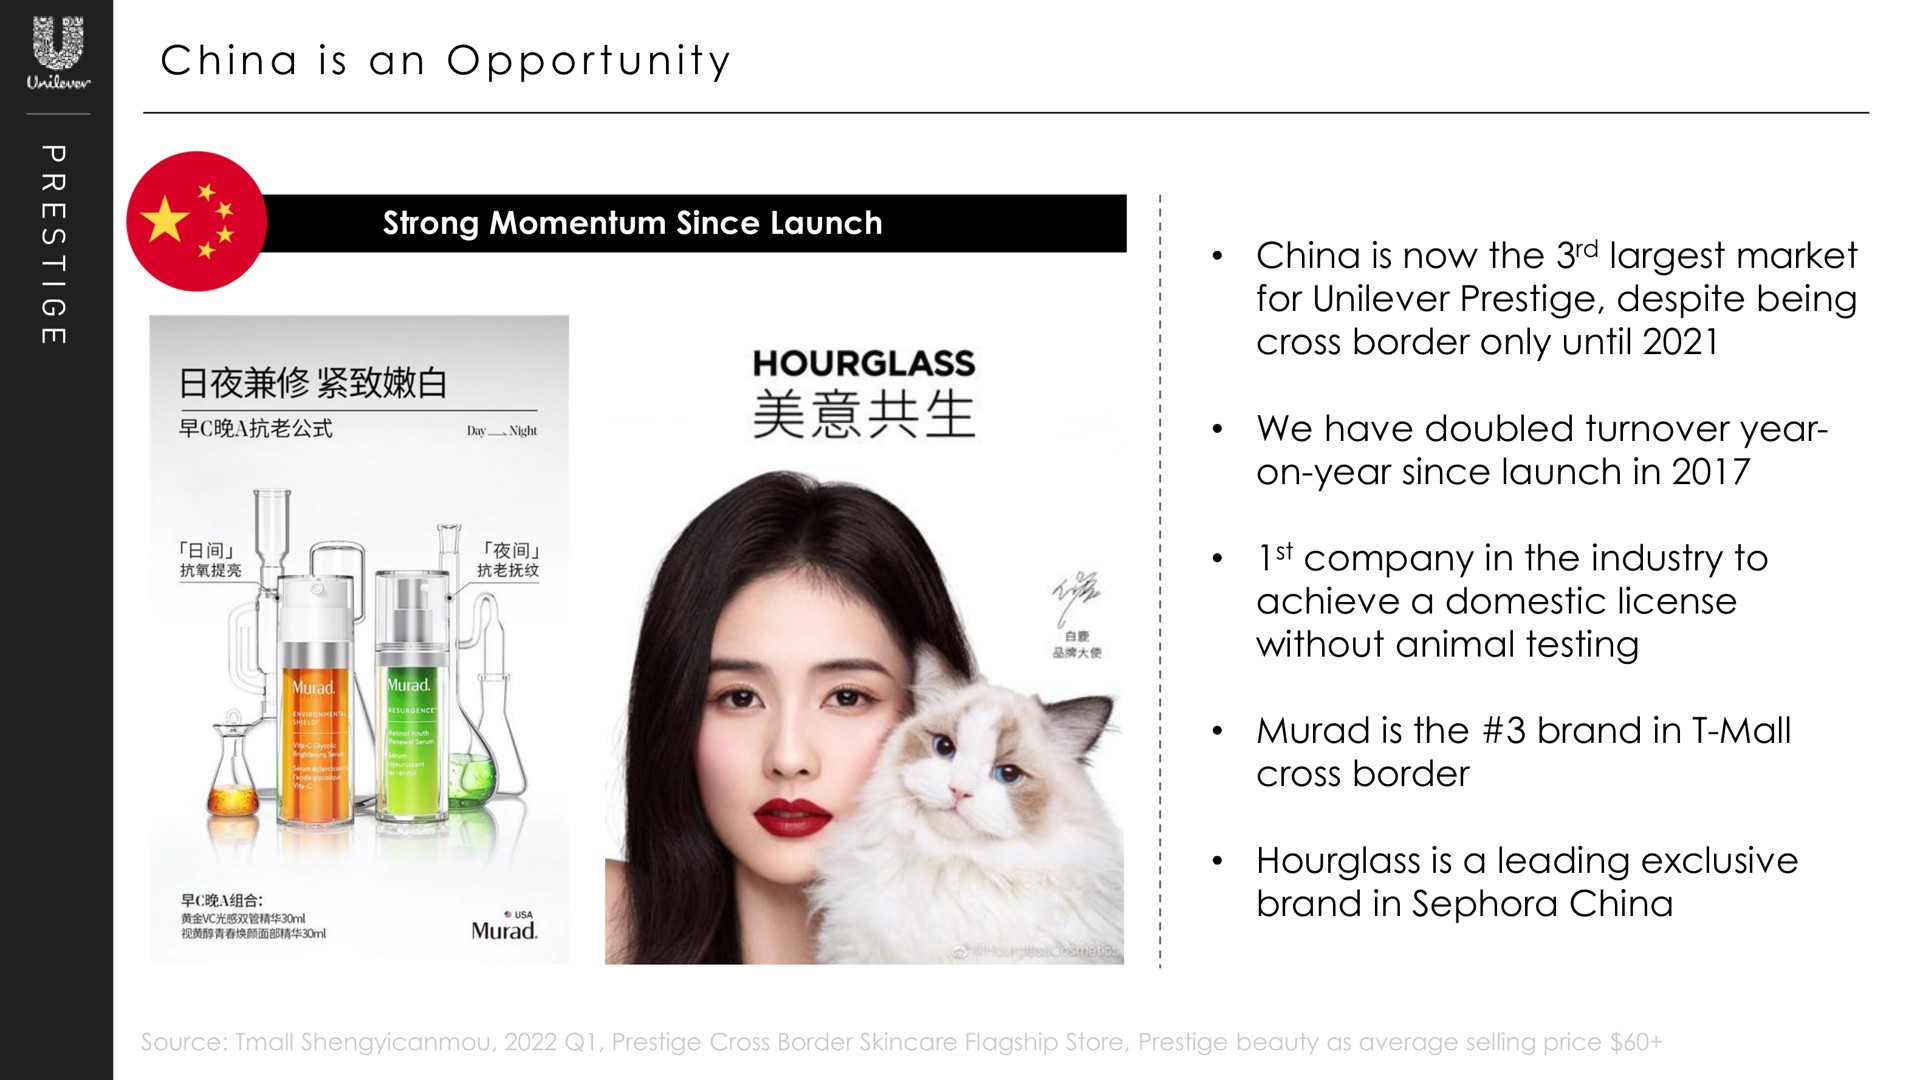 i a i a i china is an opportunity at china is now the market for prestige despite being company in the industry to achieve domestic license without animal testing cross border hourglass is leading exclusive | Unilever